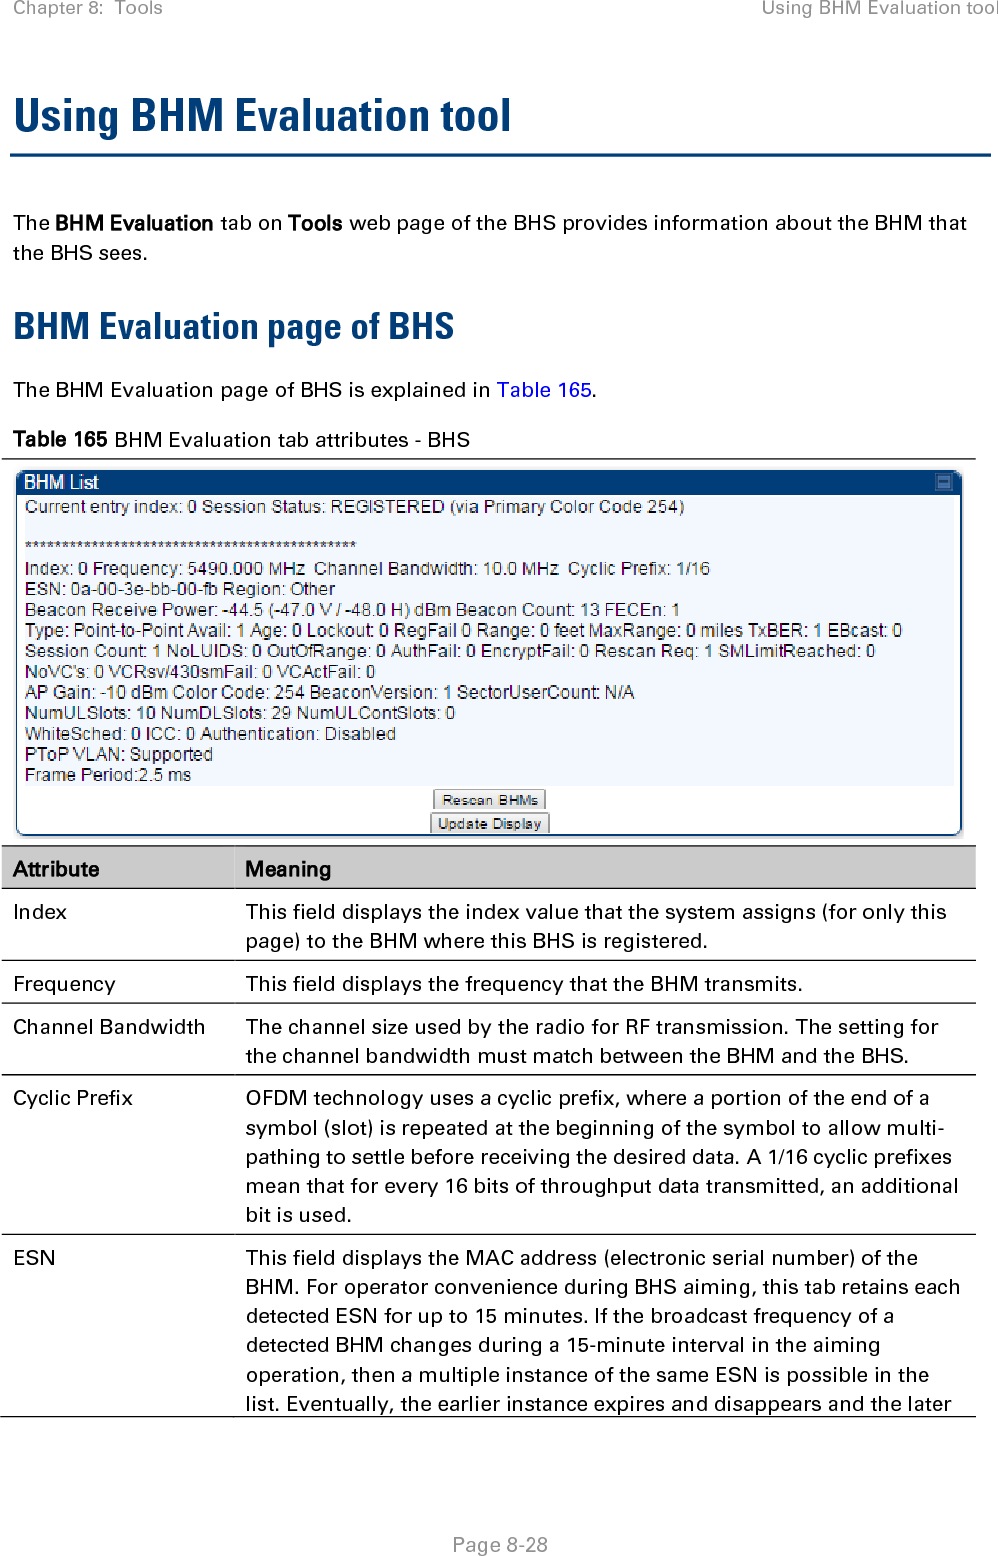 Chapter 8:  Tools Using BHM Evaluation tool   Page 8-29 instance remains to the end of its interval, but you can ignore the early instance(s) whenever two or more are present. Region This field displays the BHM’s configured Country Code setting. Power Level  This field displays the BHS’s combined received power level from the BHM’s transmission. Beacon Count A count of the beacons seen in a given time period. FECEn This field contains the SNMP value from the BHM that indicates whether the Forward Error Correction feature is enabled. 0: FEC is disabled 1: FEC is enabled Type Multipoint indicates that the listing is for a BHM. Age This is a counter for the number of minutes that the BHM has been inactive. At 15 minutes of inactivity for the BHS, this field is removed from the BHM Evaluation tab in the BHS. Lockout This field displays how many times the BHS has been temporarily locked out of making registration attempts. RegFail This field displays how many registration attempts by this BHS failed. Range This field displays the distance in feet for this link. To derive the distance in meters, multiply the value of this parameter by 0.3048. MaxRange This field indicates the configured value for the AP’s Max Range parameter. TxBER A 1 in this field indicates the BHM is sending Radio BER. EBcast A 1 in this field indicates the BHM is encrypting broadcast packets. A 0 indicates it is not. Session Count  This field displays how many sessions the BHS has had with the BHM. Typically, this is the sum of Reg Count and Re-Reg Count. However, the result of internal calculation may display here as a value that slightly differs from the sum.  In the case of a multipoint link, if the number of sessions is significantly greater than the number for other BHS’s, then this may indicate a link problem or an interference problem. NoLUIDs This field indicates how many times the BHM has needed to reject a registration request from a BHS because its capacity to make LUID assignments is full. This then locks the BHS out of making any valid attempt for the next 15 minutes. It is extremely unlikely that a non-zero number would be displayed here. OutOfRange This field indicates how many times the BHM has rejected a registration request from a BHS because the BHS is a further distance away than the 